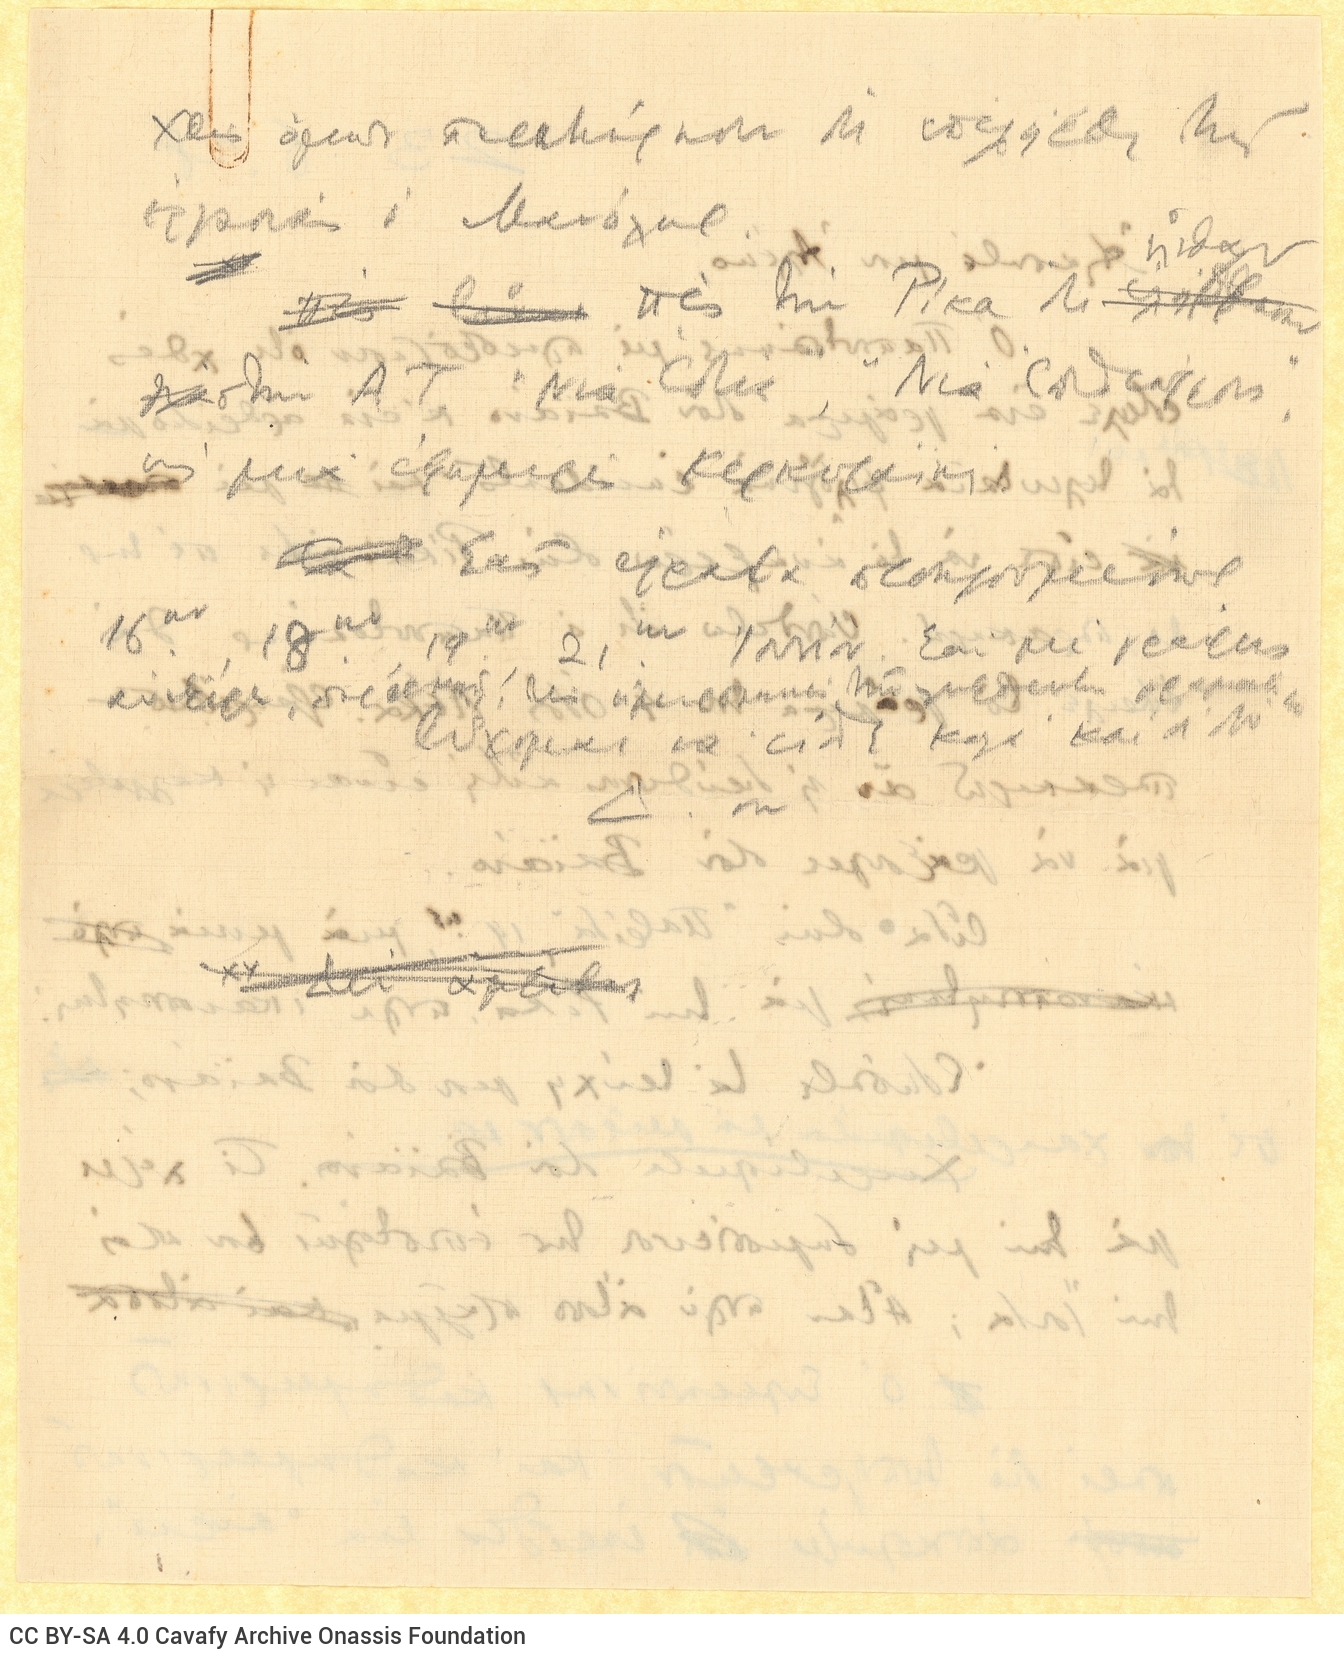 Handwritten draft letter by Cavafy to Alekos [Singopoulo] on both sides of a sheet. The poet informs him of issues regarding 